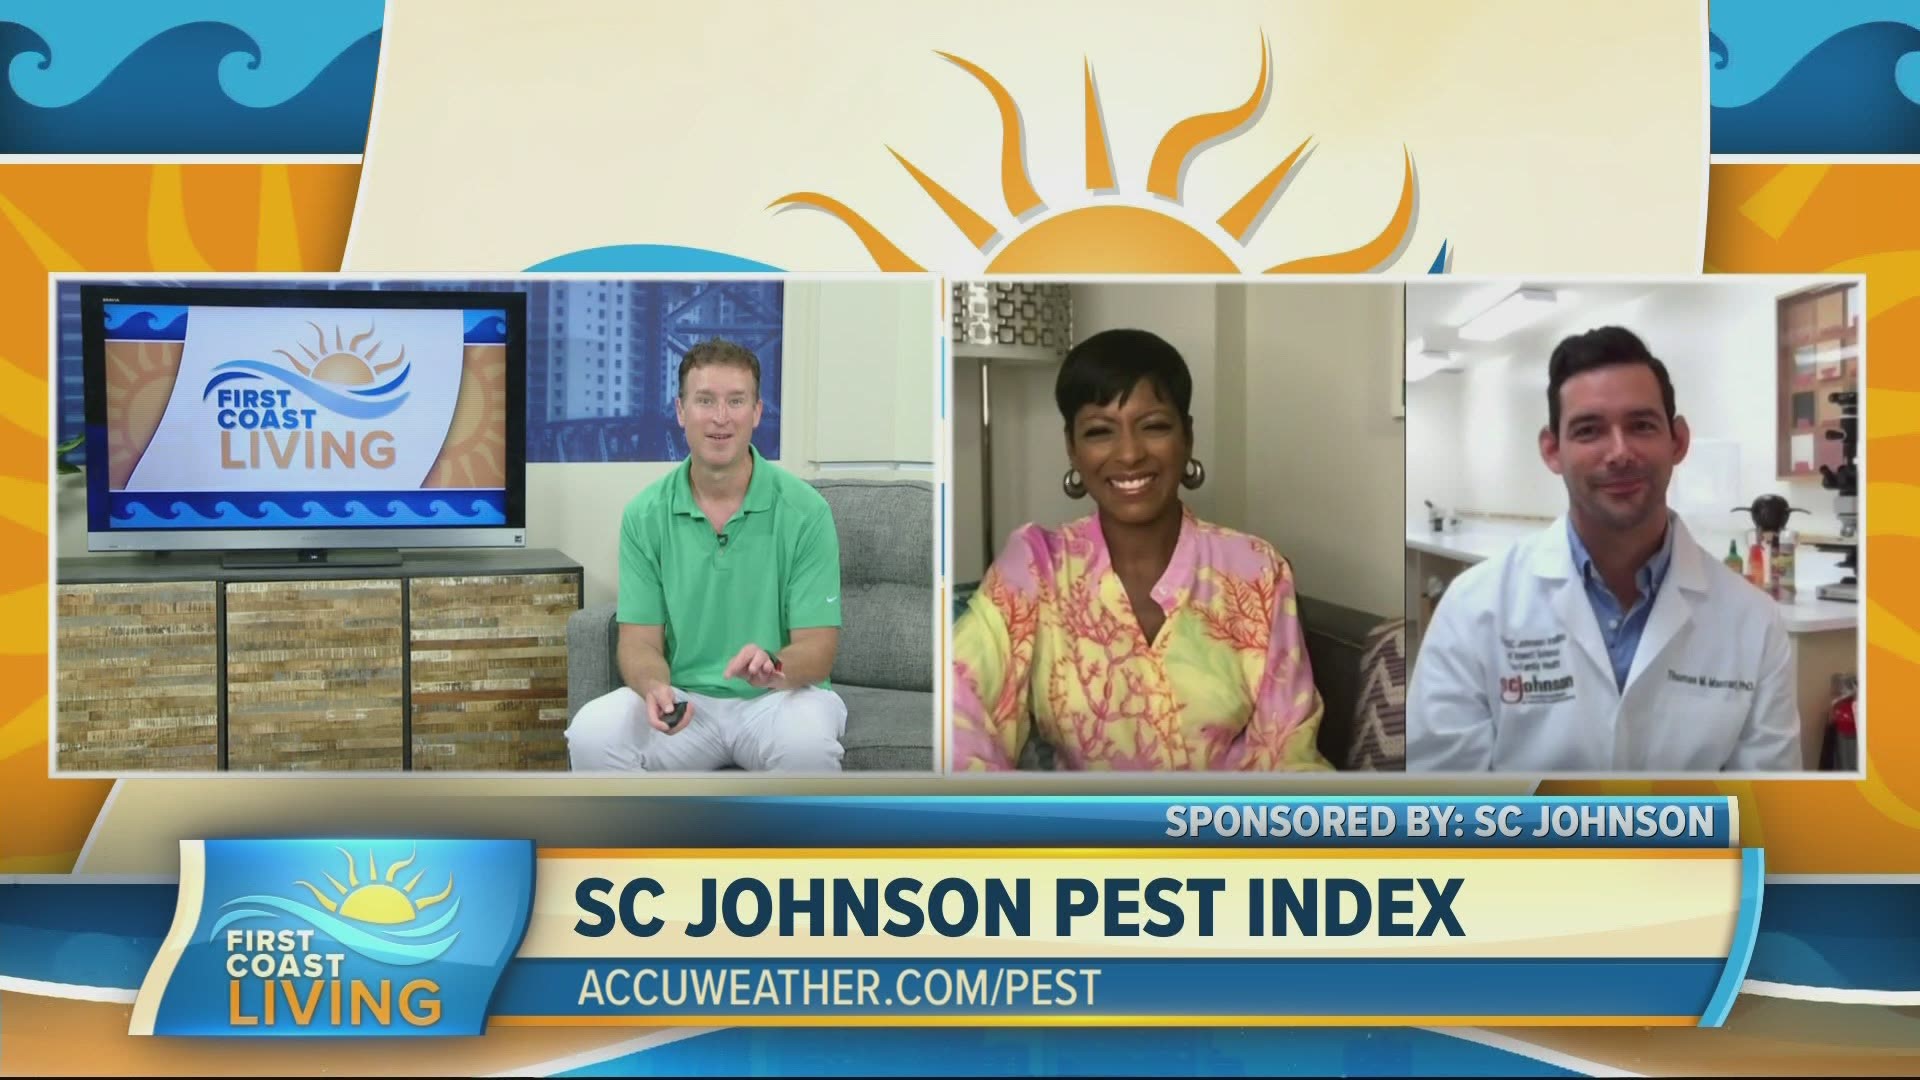 Dr. Tom Mascari shares a science-driven Pest Index to help your family prepare for a busy bug season. Tamron Hall, a Mom and TV show host has valuable tips.